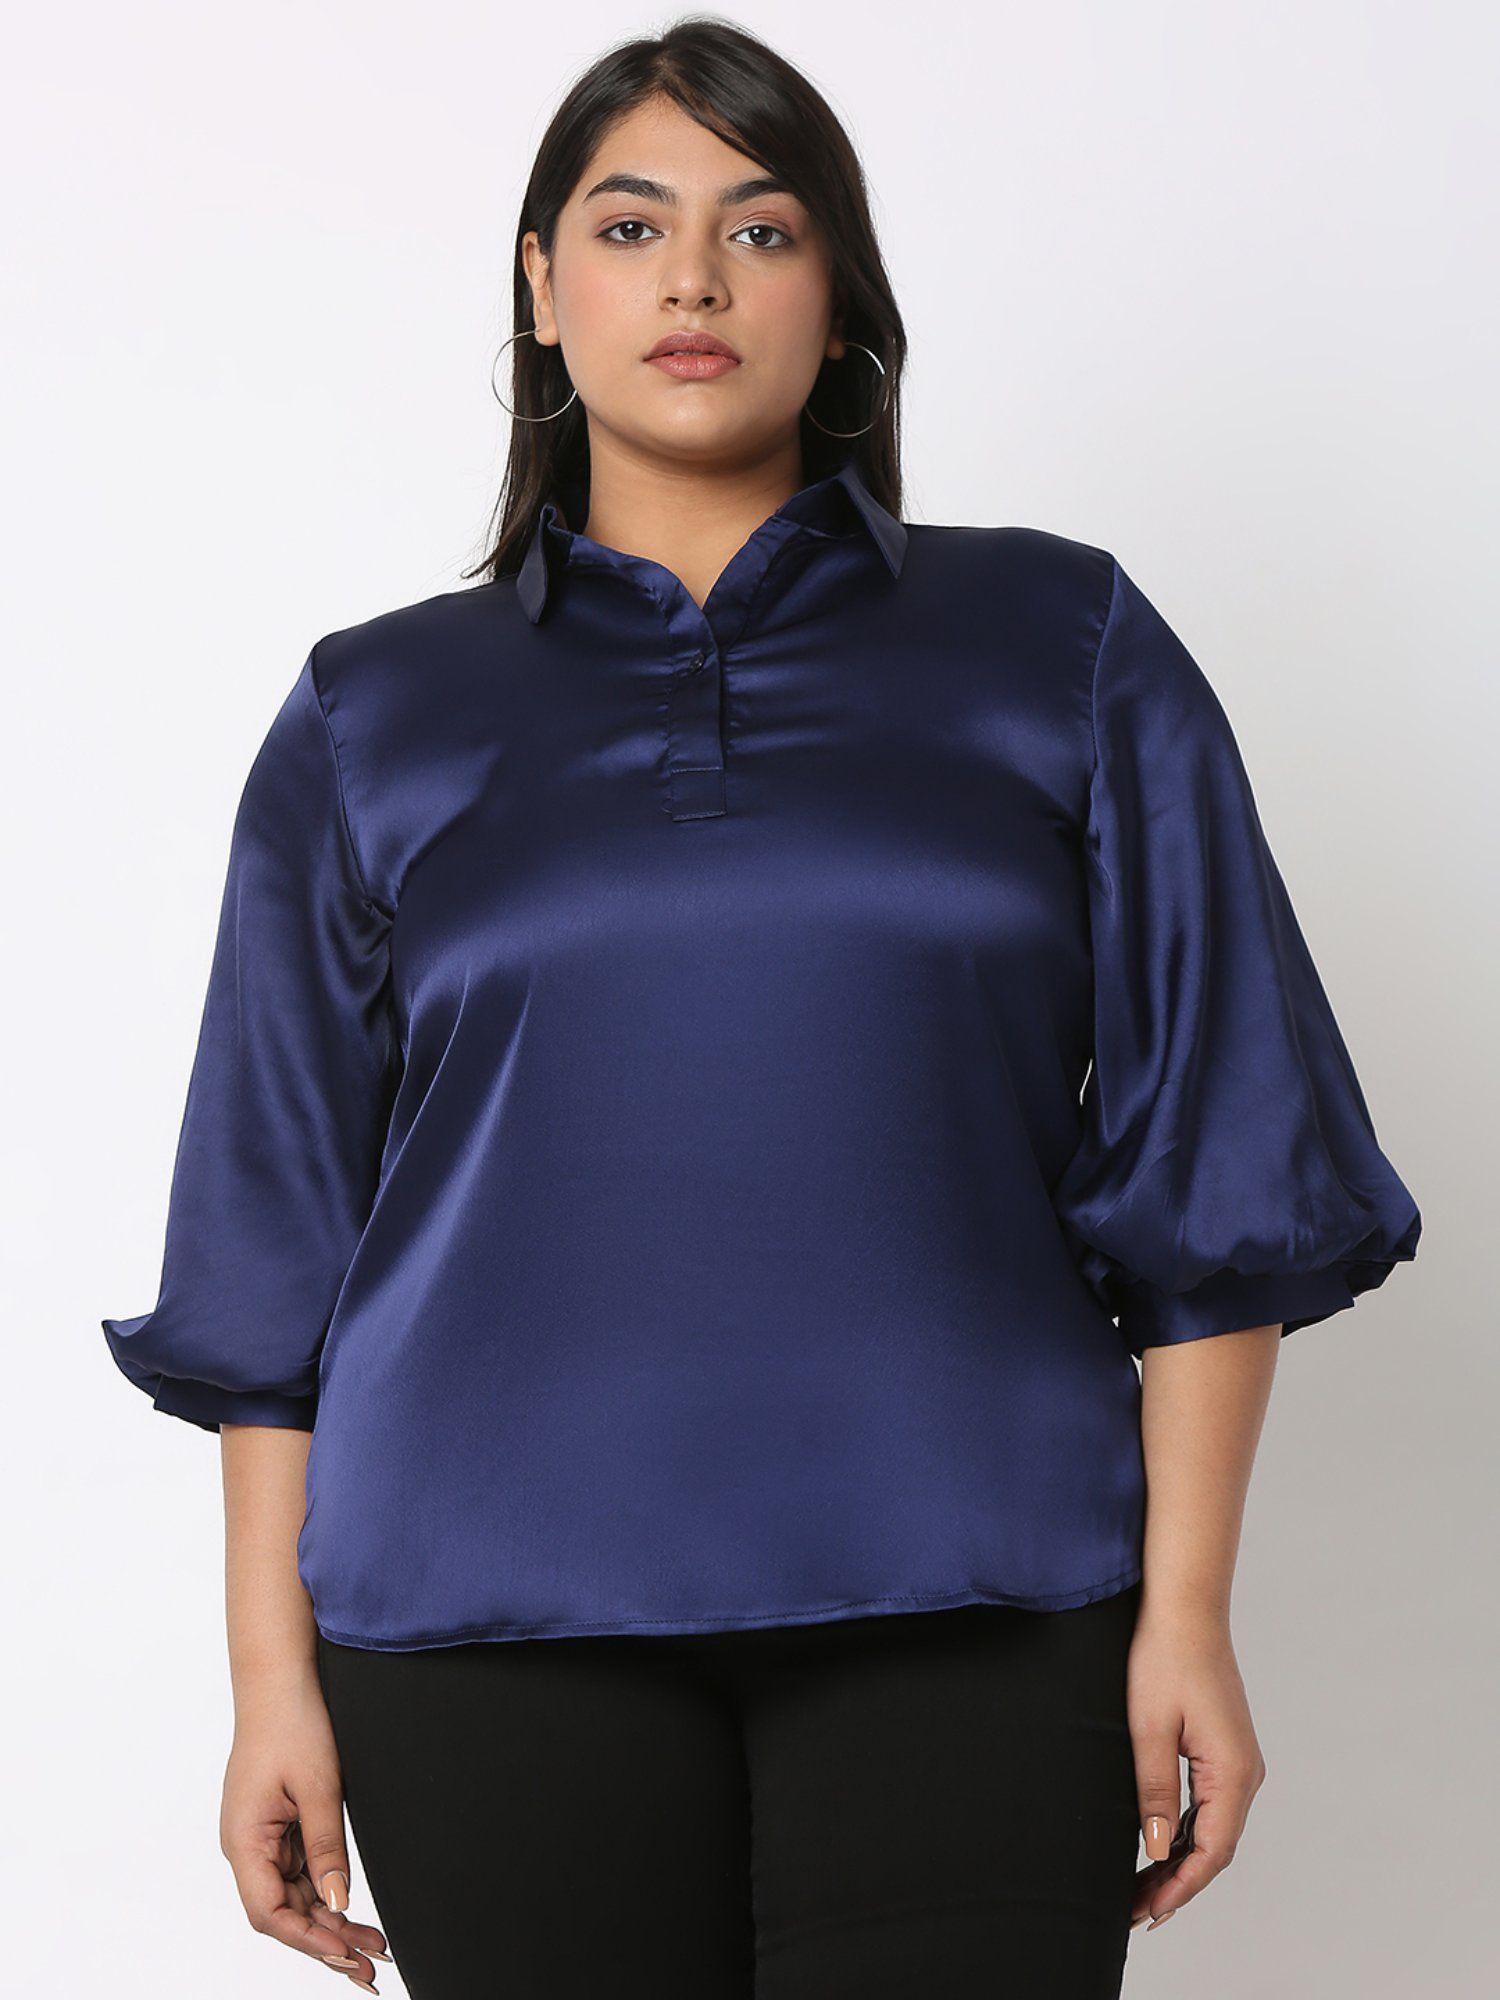 curves by mish navy blue solid shirt style top